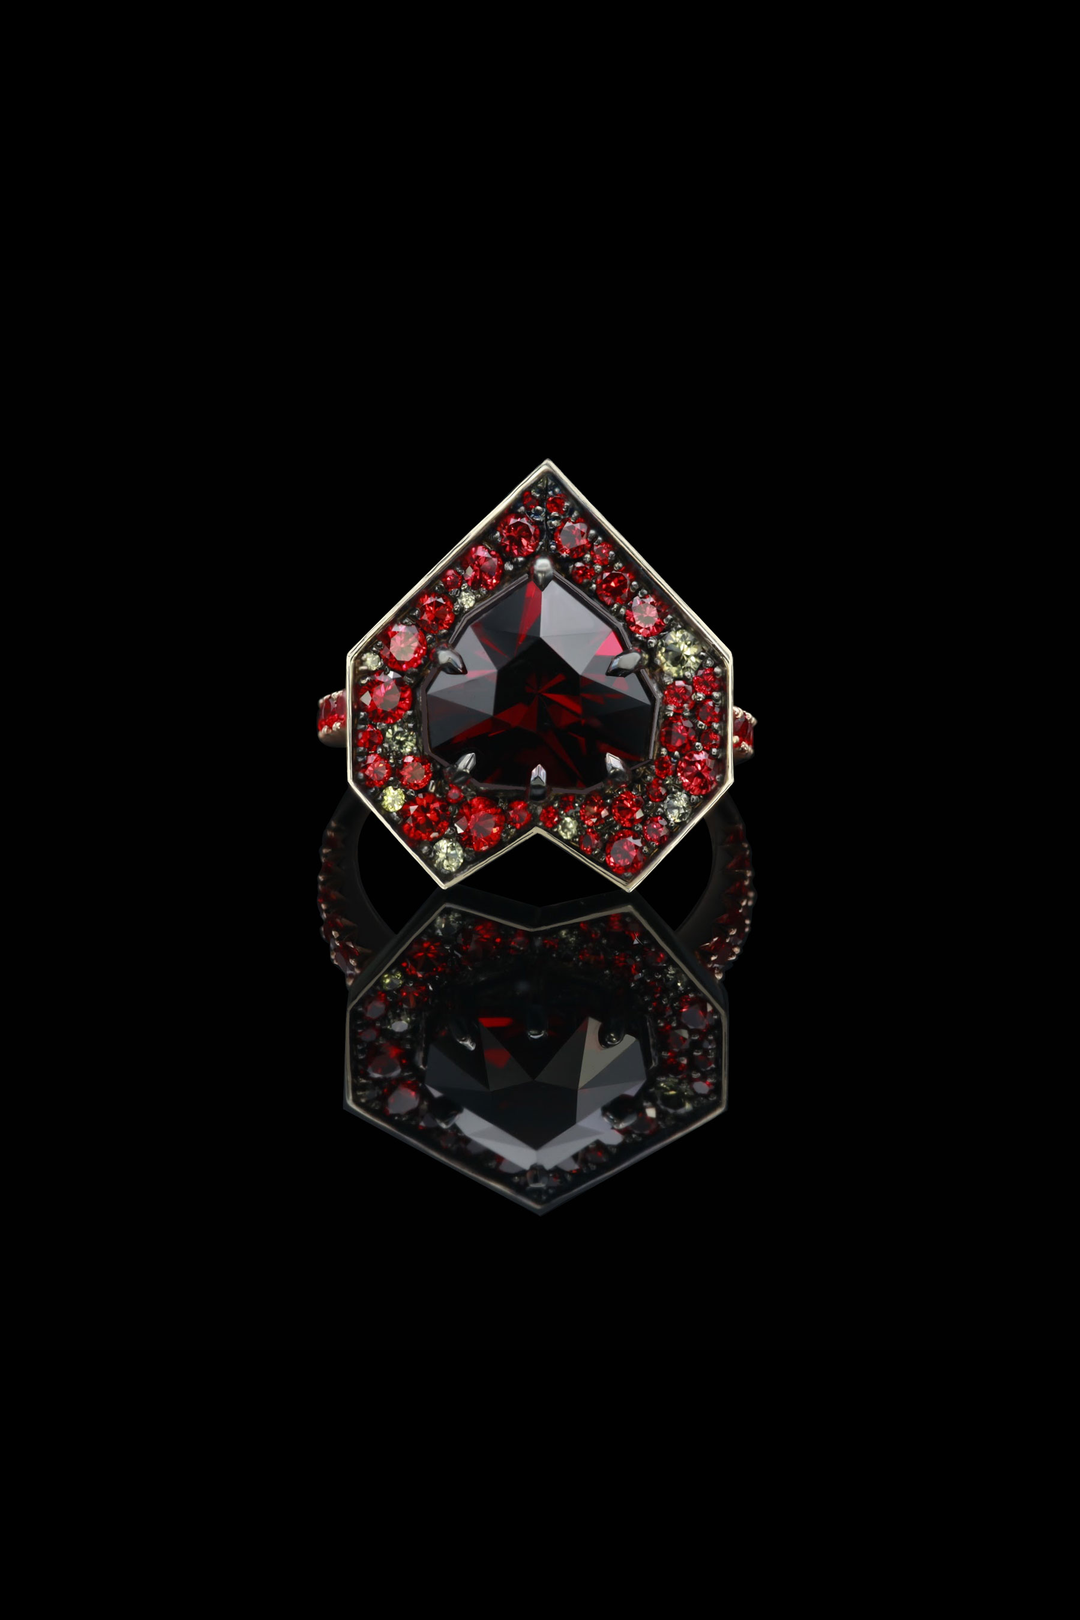 Front Facing image of custom designed Ring with hear-shaped, fancy cut garnet and random pave set sapphires around. The top of the ring is an angular heart shape. Stones are mostly red in colour.